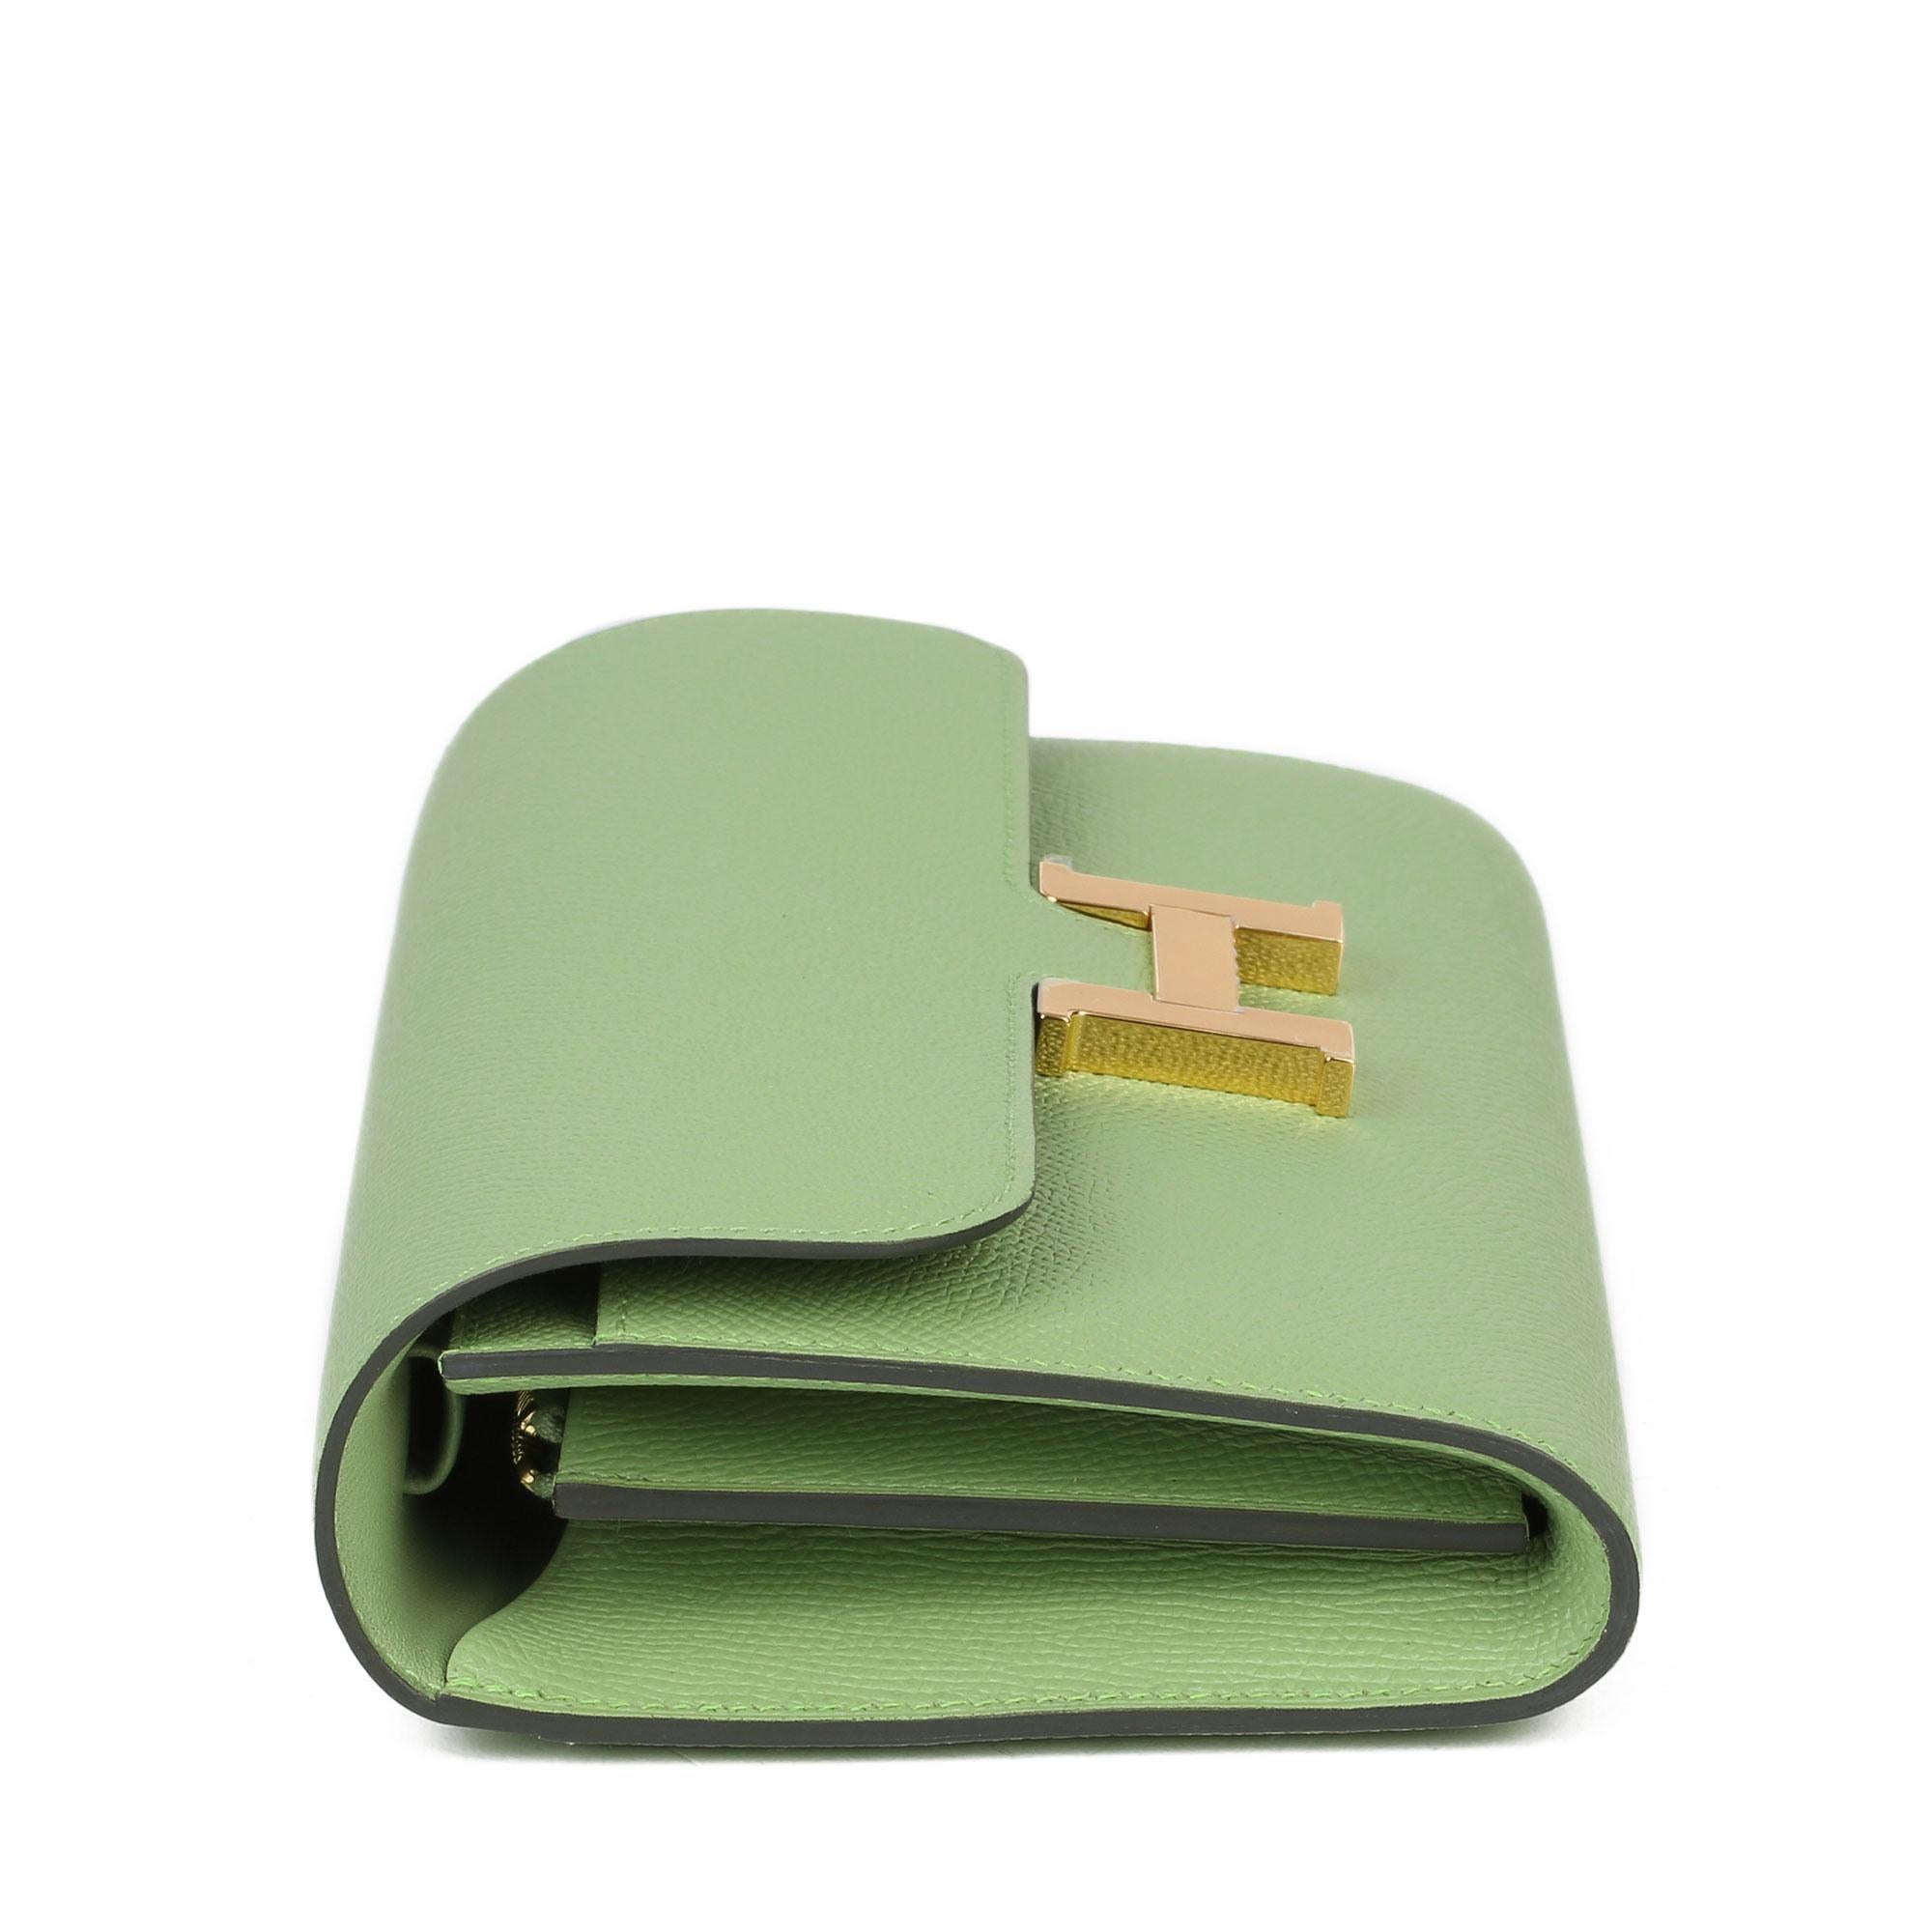 HERMÈS
Vert Criquet Epsom Leather Constance To Go Long Wallet

Xupes Reference: CB265
Serial Number: Y
Age (Circa): 2020
Accompanied By: Hermès Box, Photocopy of invoice, Shoulder Strap
Authenticity Details: Date Stamp (Made in France)
Gender: